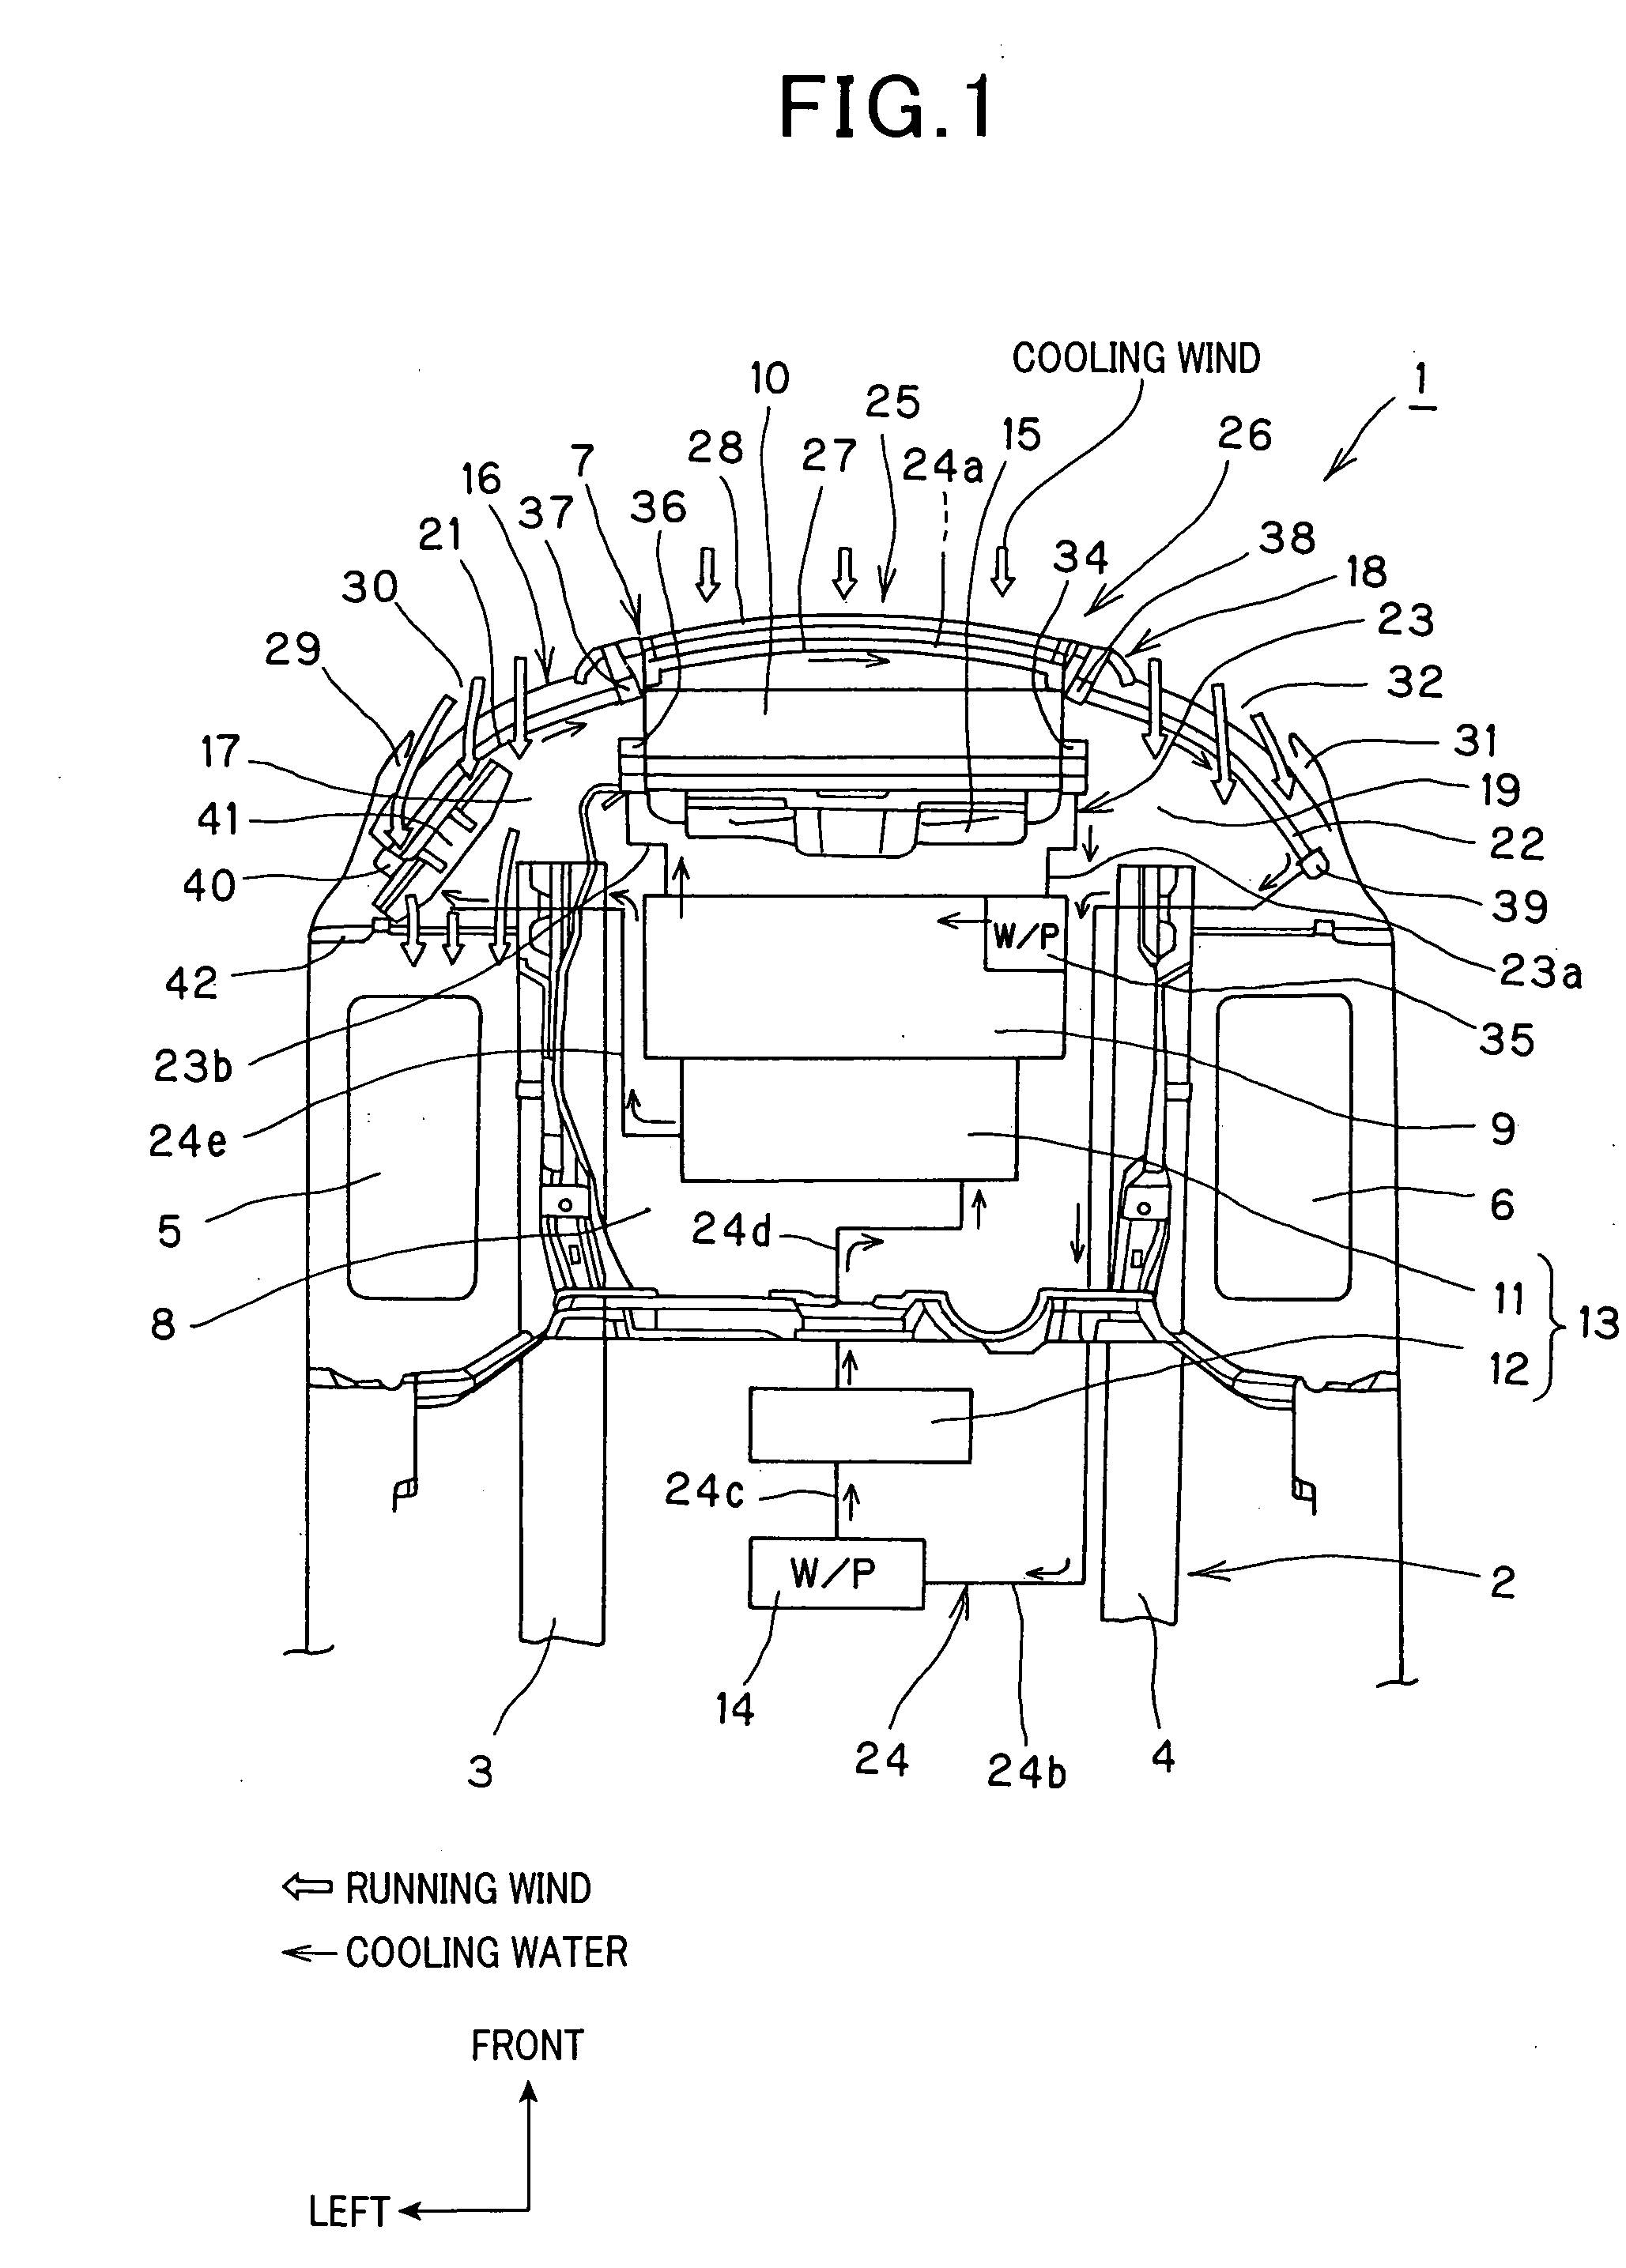 Cooling apparatus for a fuel cell powered vehicle